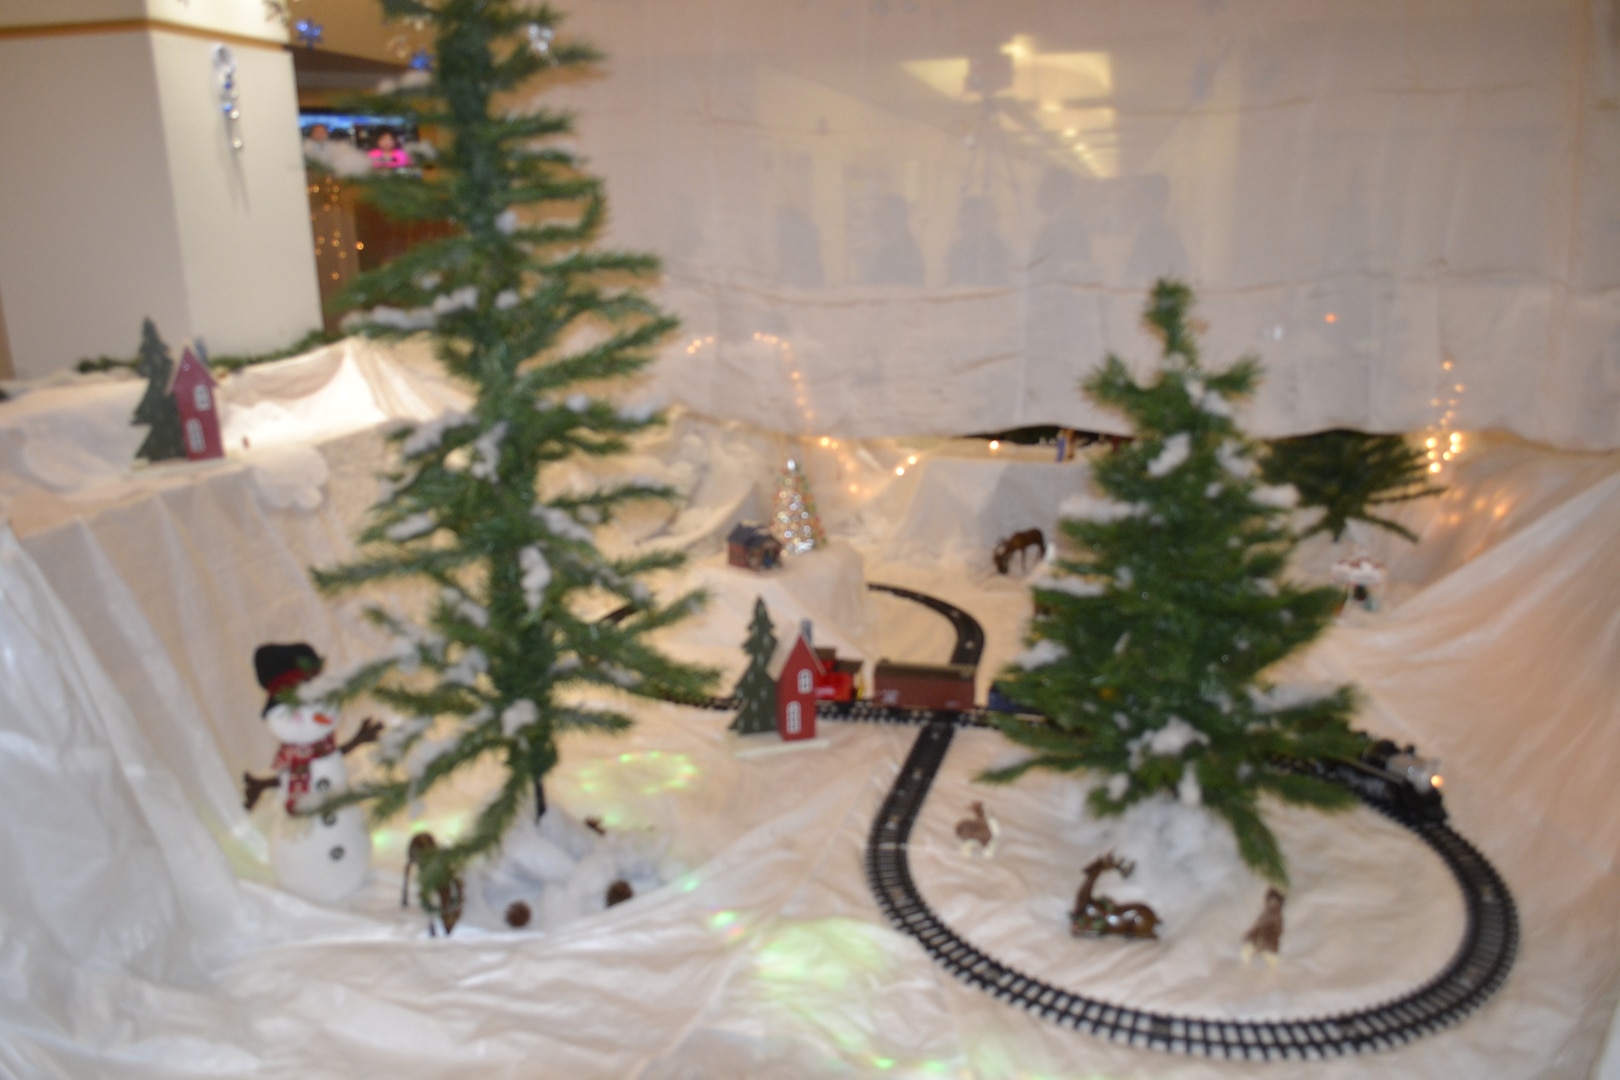 A train circles a winter landscape decorated with items representing the mission of the Construction and Equipment supply chain as part of their entry in the Defense Logistics Agency Troop Support’s 2018 holiday decorating contest in Philadelphia Dec. 20, 2018.